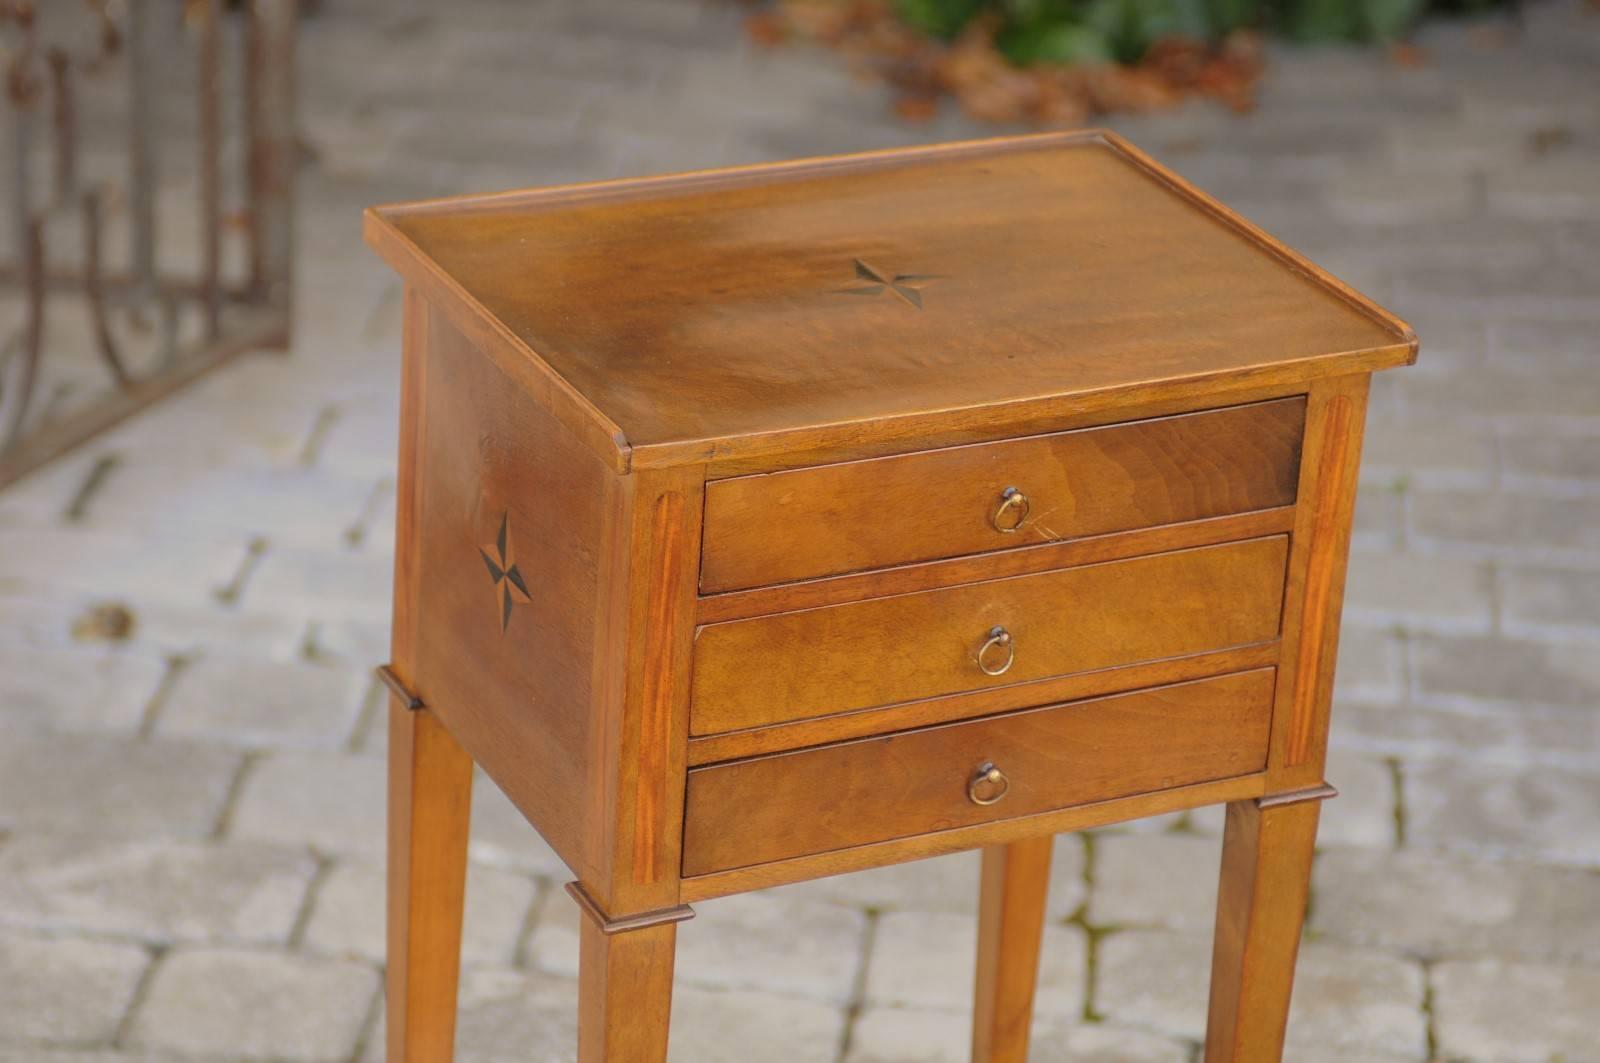 20th Century French 1920s Wooden Side Table with Star Inlay, Three Drawers and Lower Shelf